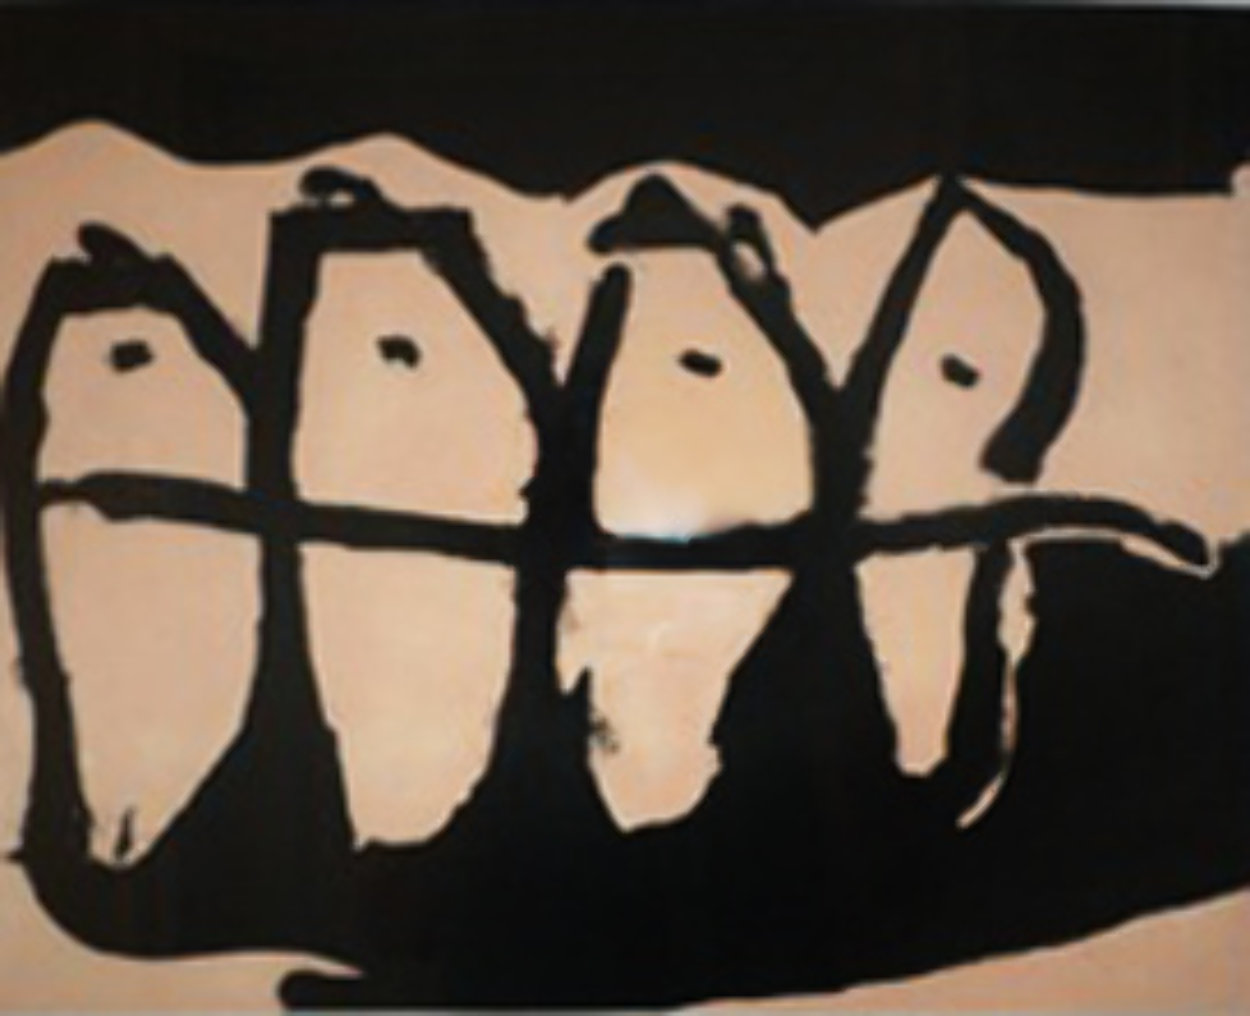 Wanderers AP 1985 Limited Edition Print by Robert Motherwell